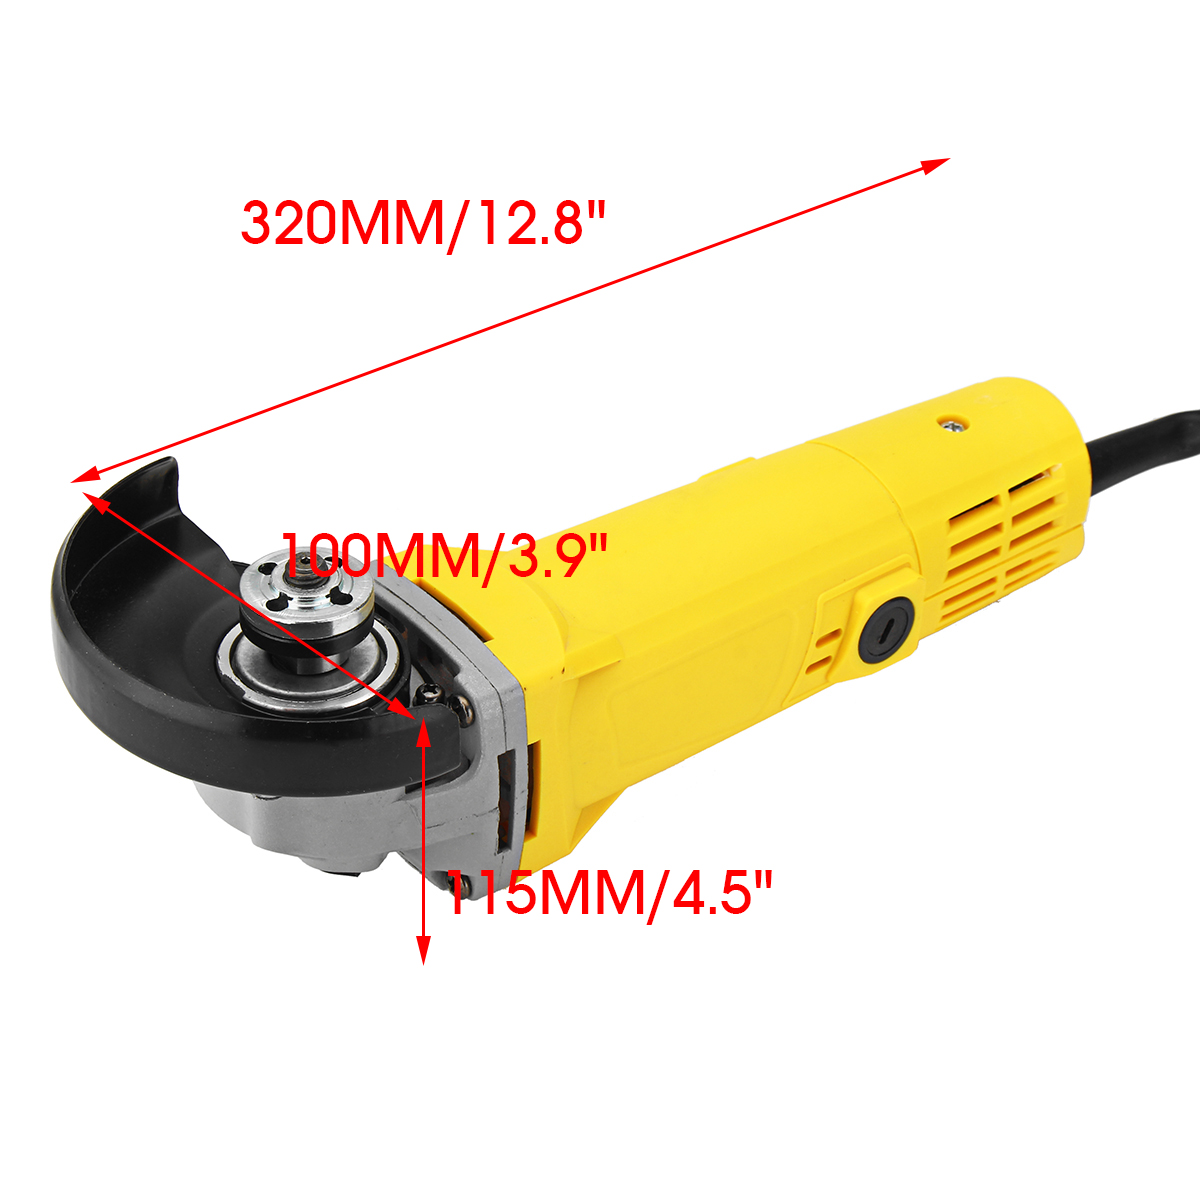 100mm-850W-220V-Portable-Electric-Angle-Grinder-Muti-Function-Household-Polish-Machine-Grinding-Cutt-1391941-4